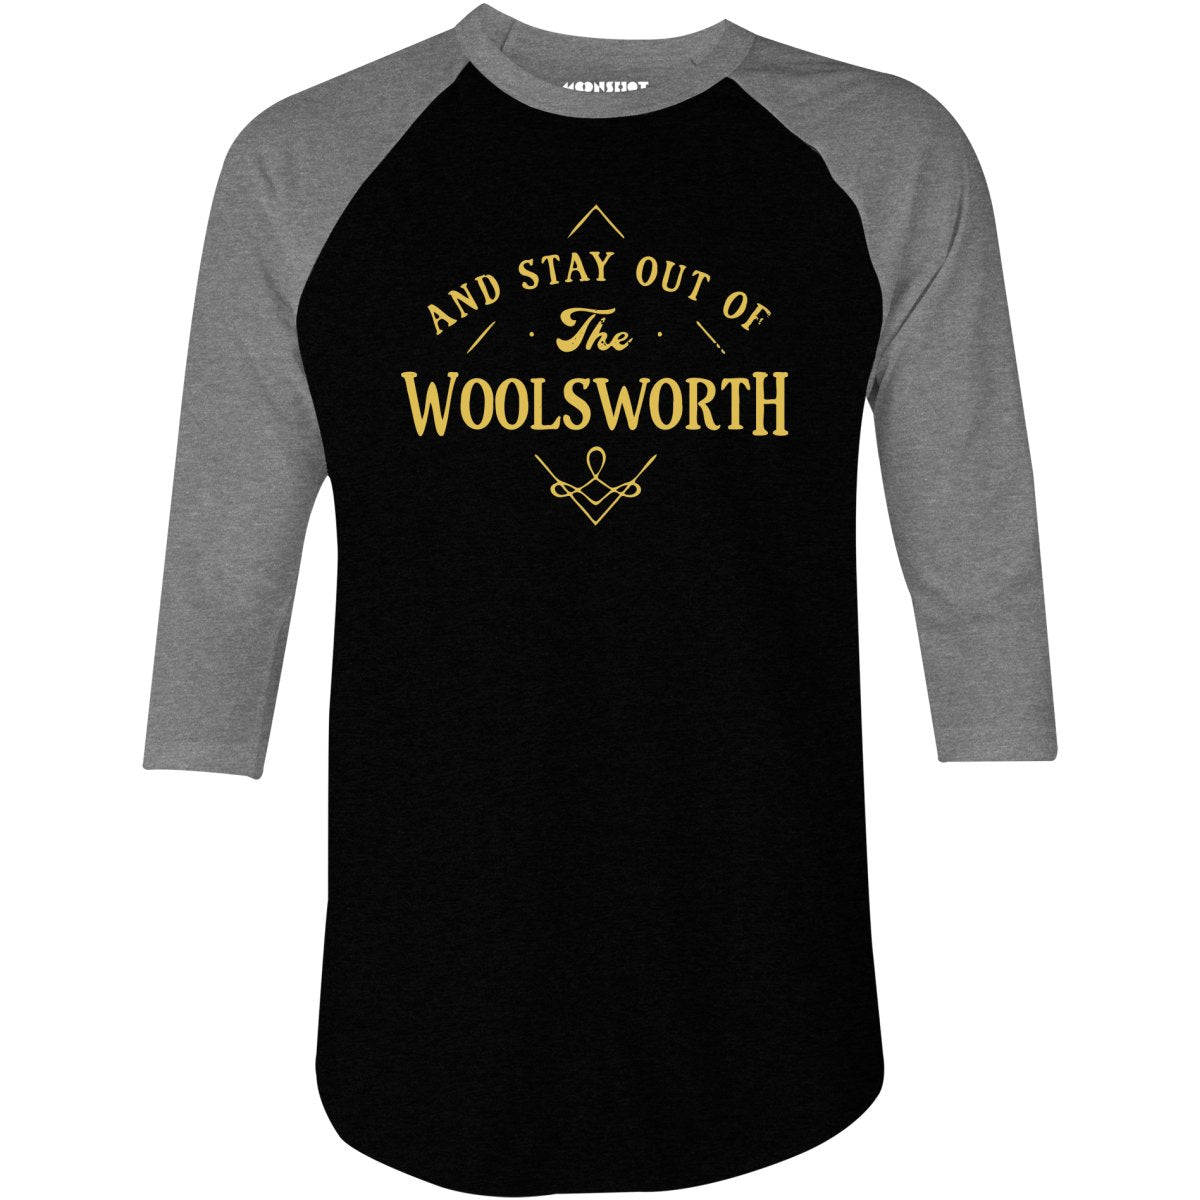 And Stay Out of The Woolsworth - 3/4 Sleeve Raglan T-Shirt